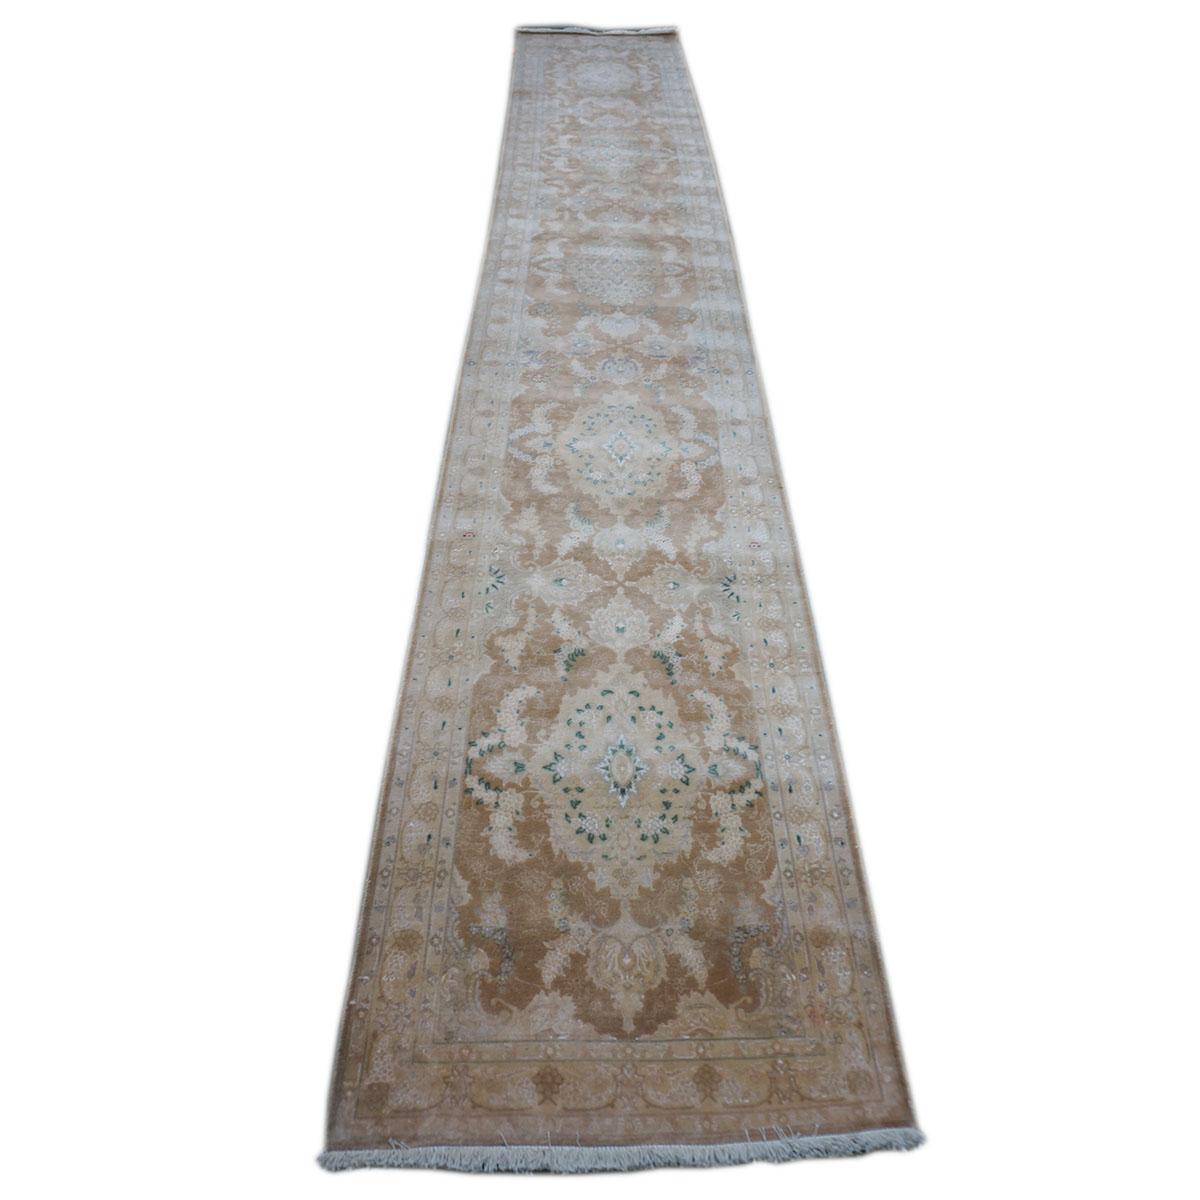 Ashly Fine Rugs presents a Vintage Persian Tabriz Hall Runner Rug. Tabriz is a northern city in modern-day Iran and has forever been famous for the fineness and craftsmanship of its handmade rugs. This beautiful runner has a light brown and ivory